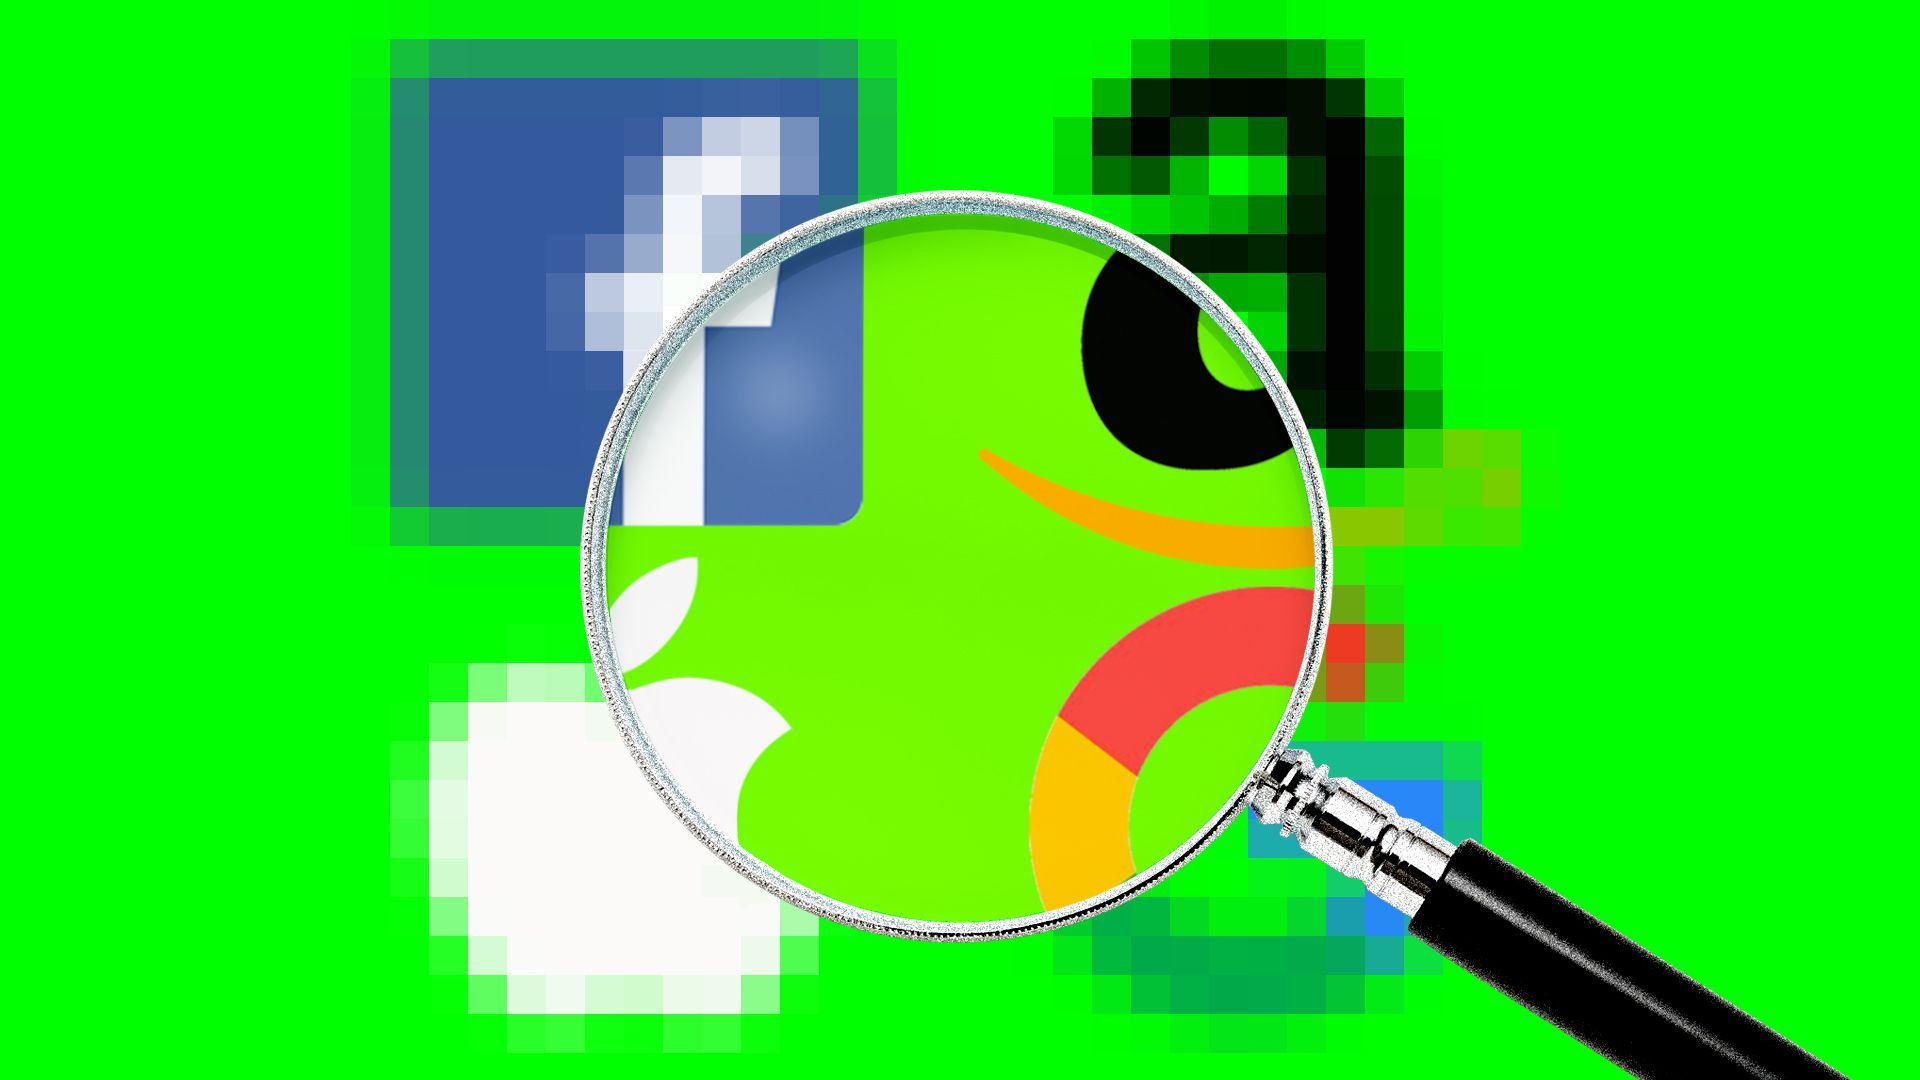 An illustration of a magnifying glass over the logos for Facebook, Amazon, Apple and Google.